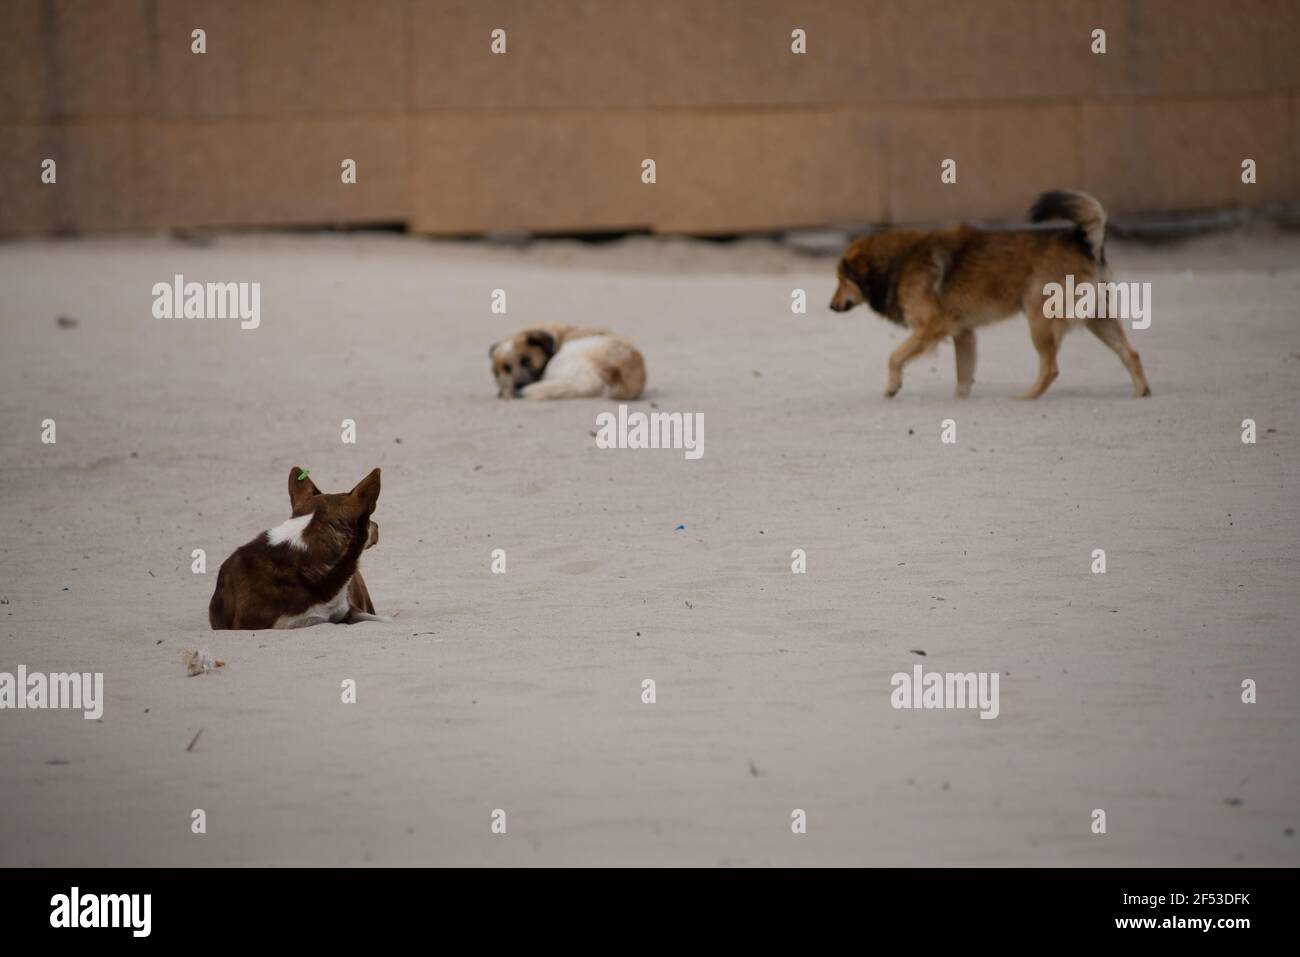 The problem of homeless animals. lonely dogs in island on the beach. Selective focus. Stock Photo